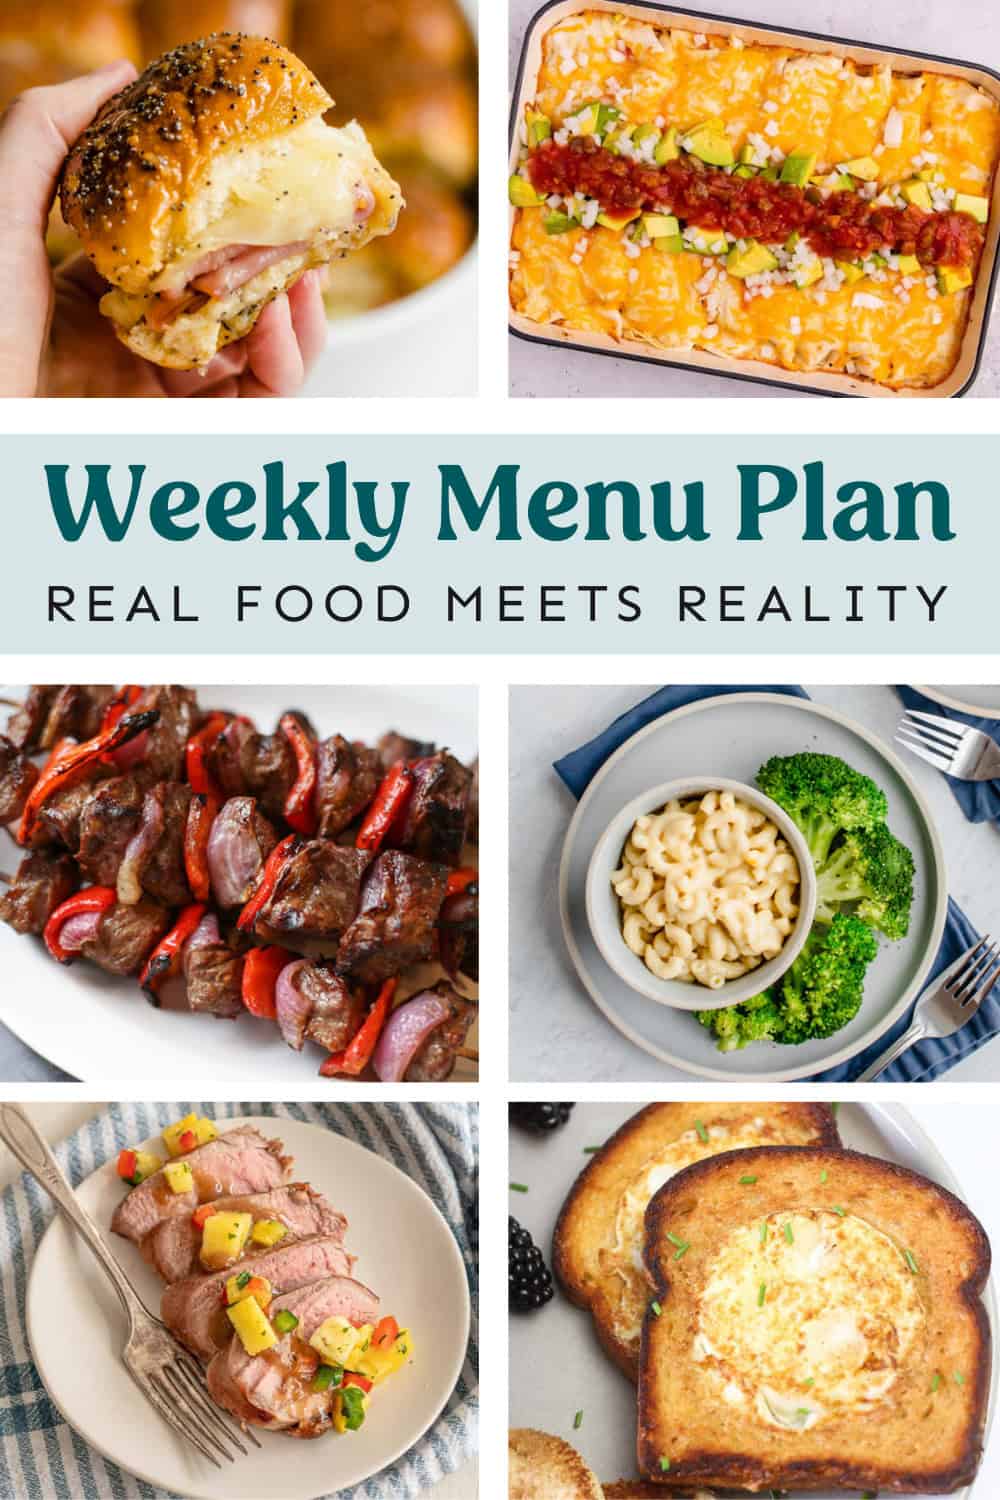 Collage of meals on the menu plan this week.